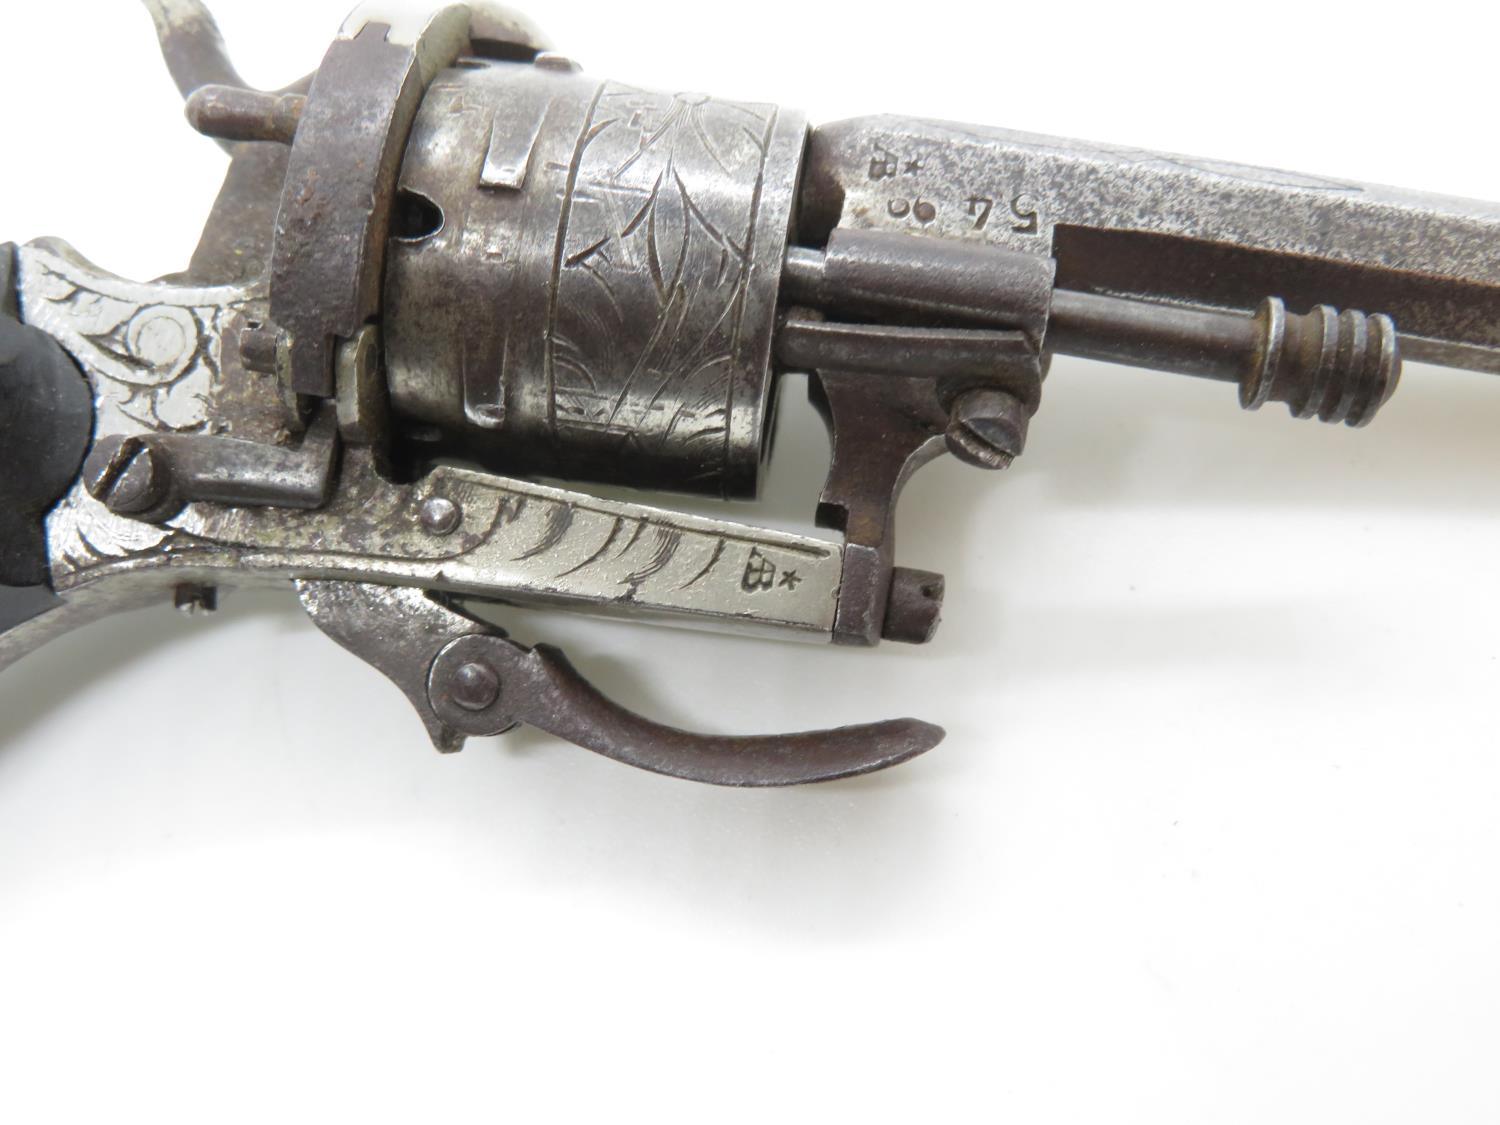 Fully functioning miniature pistol six shooter - Image 2 of 5